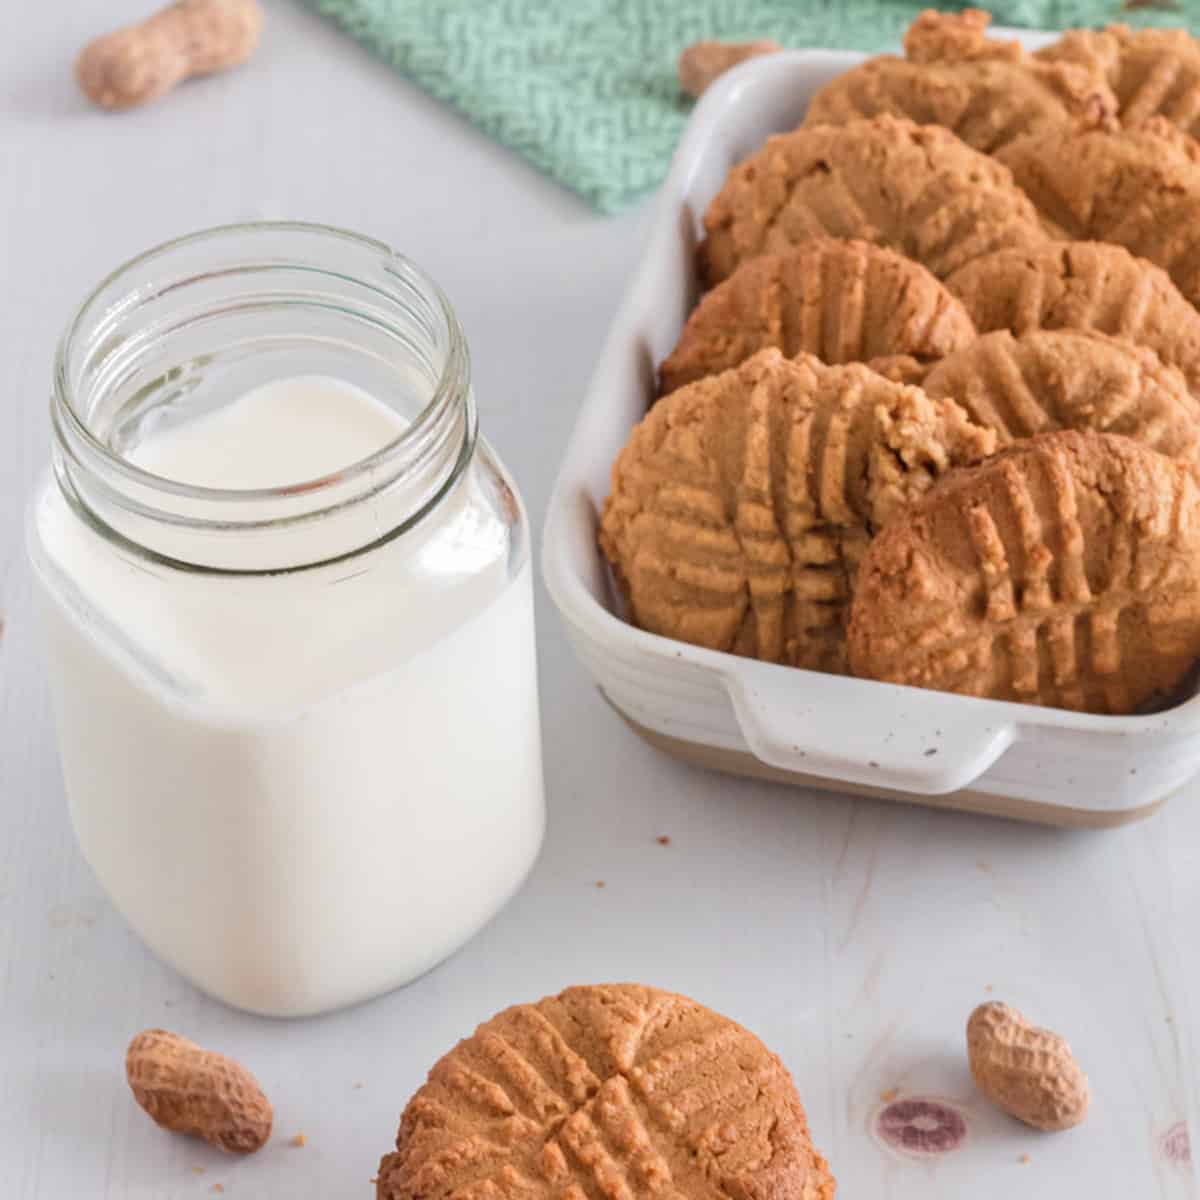 A pan full of peanut butter cookies and a glass of milk.